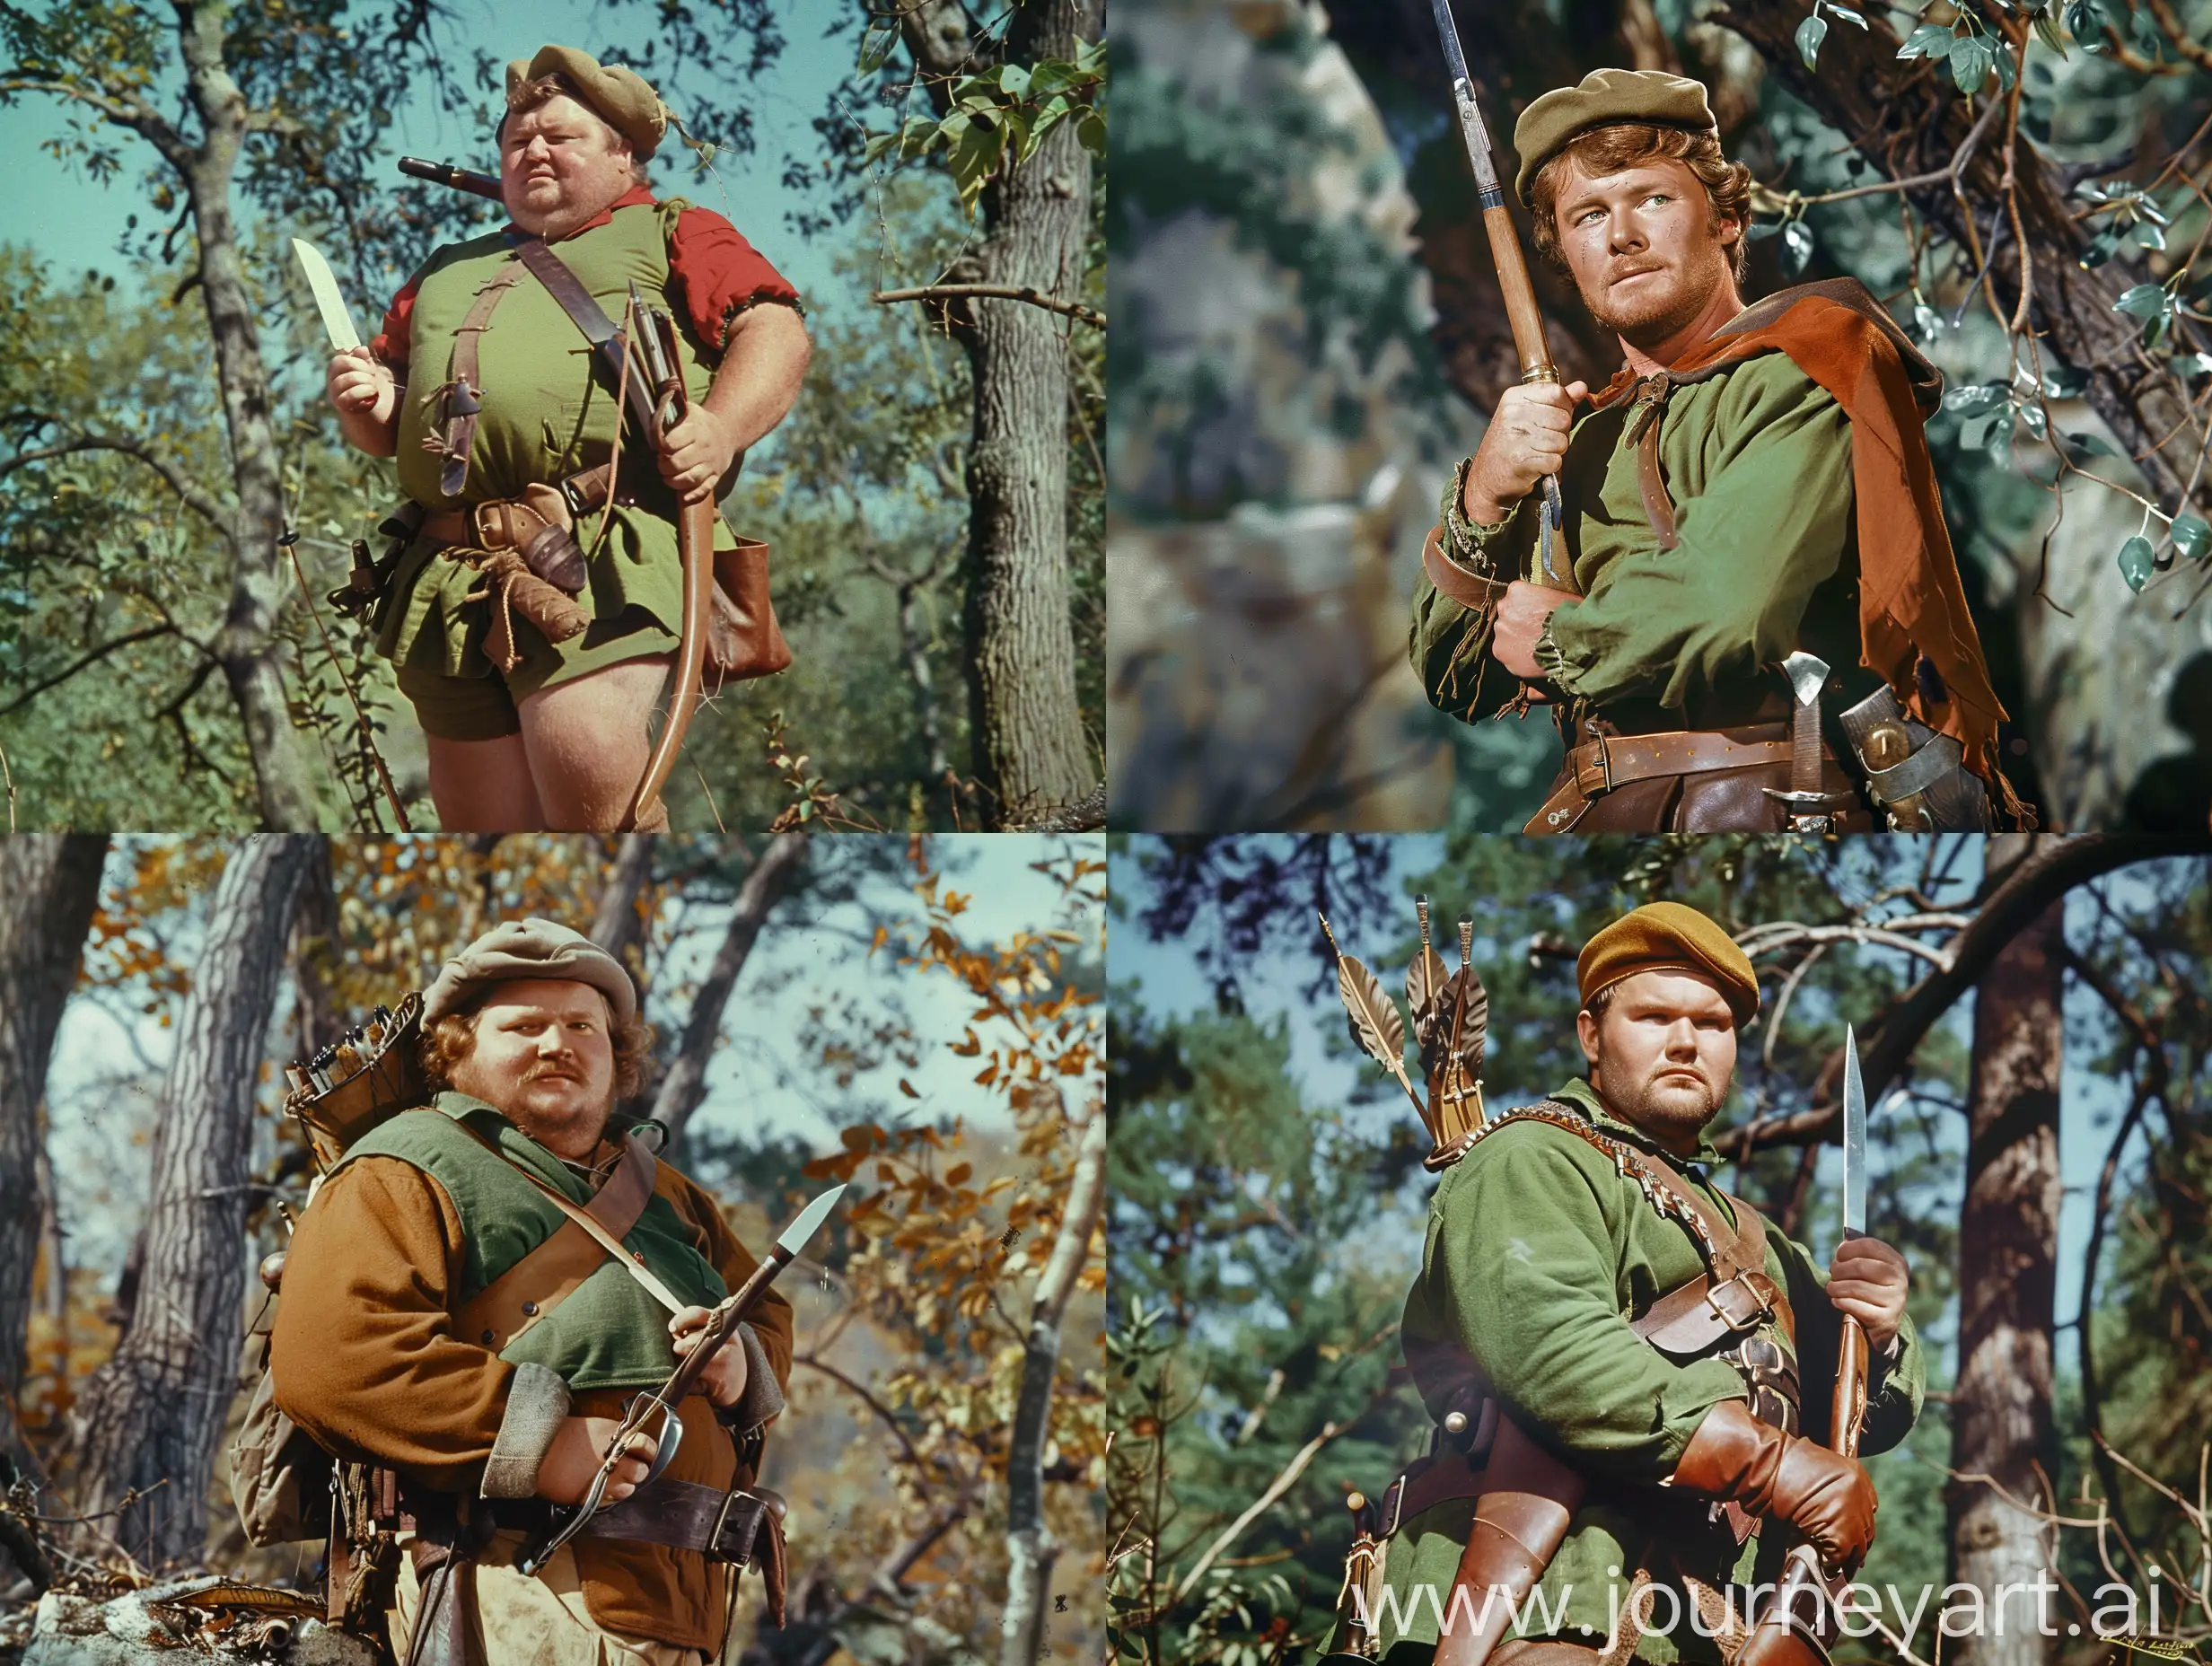 1950s-Forest-Bounty-Hunter-with-Knife-Retro-Robin-Hood-Style